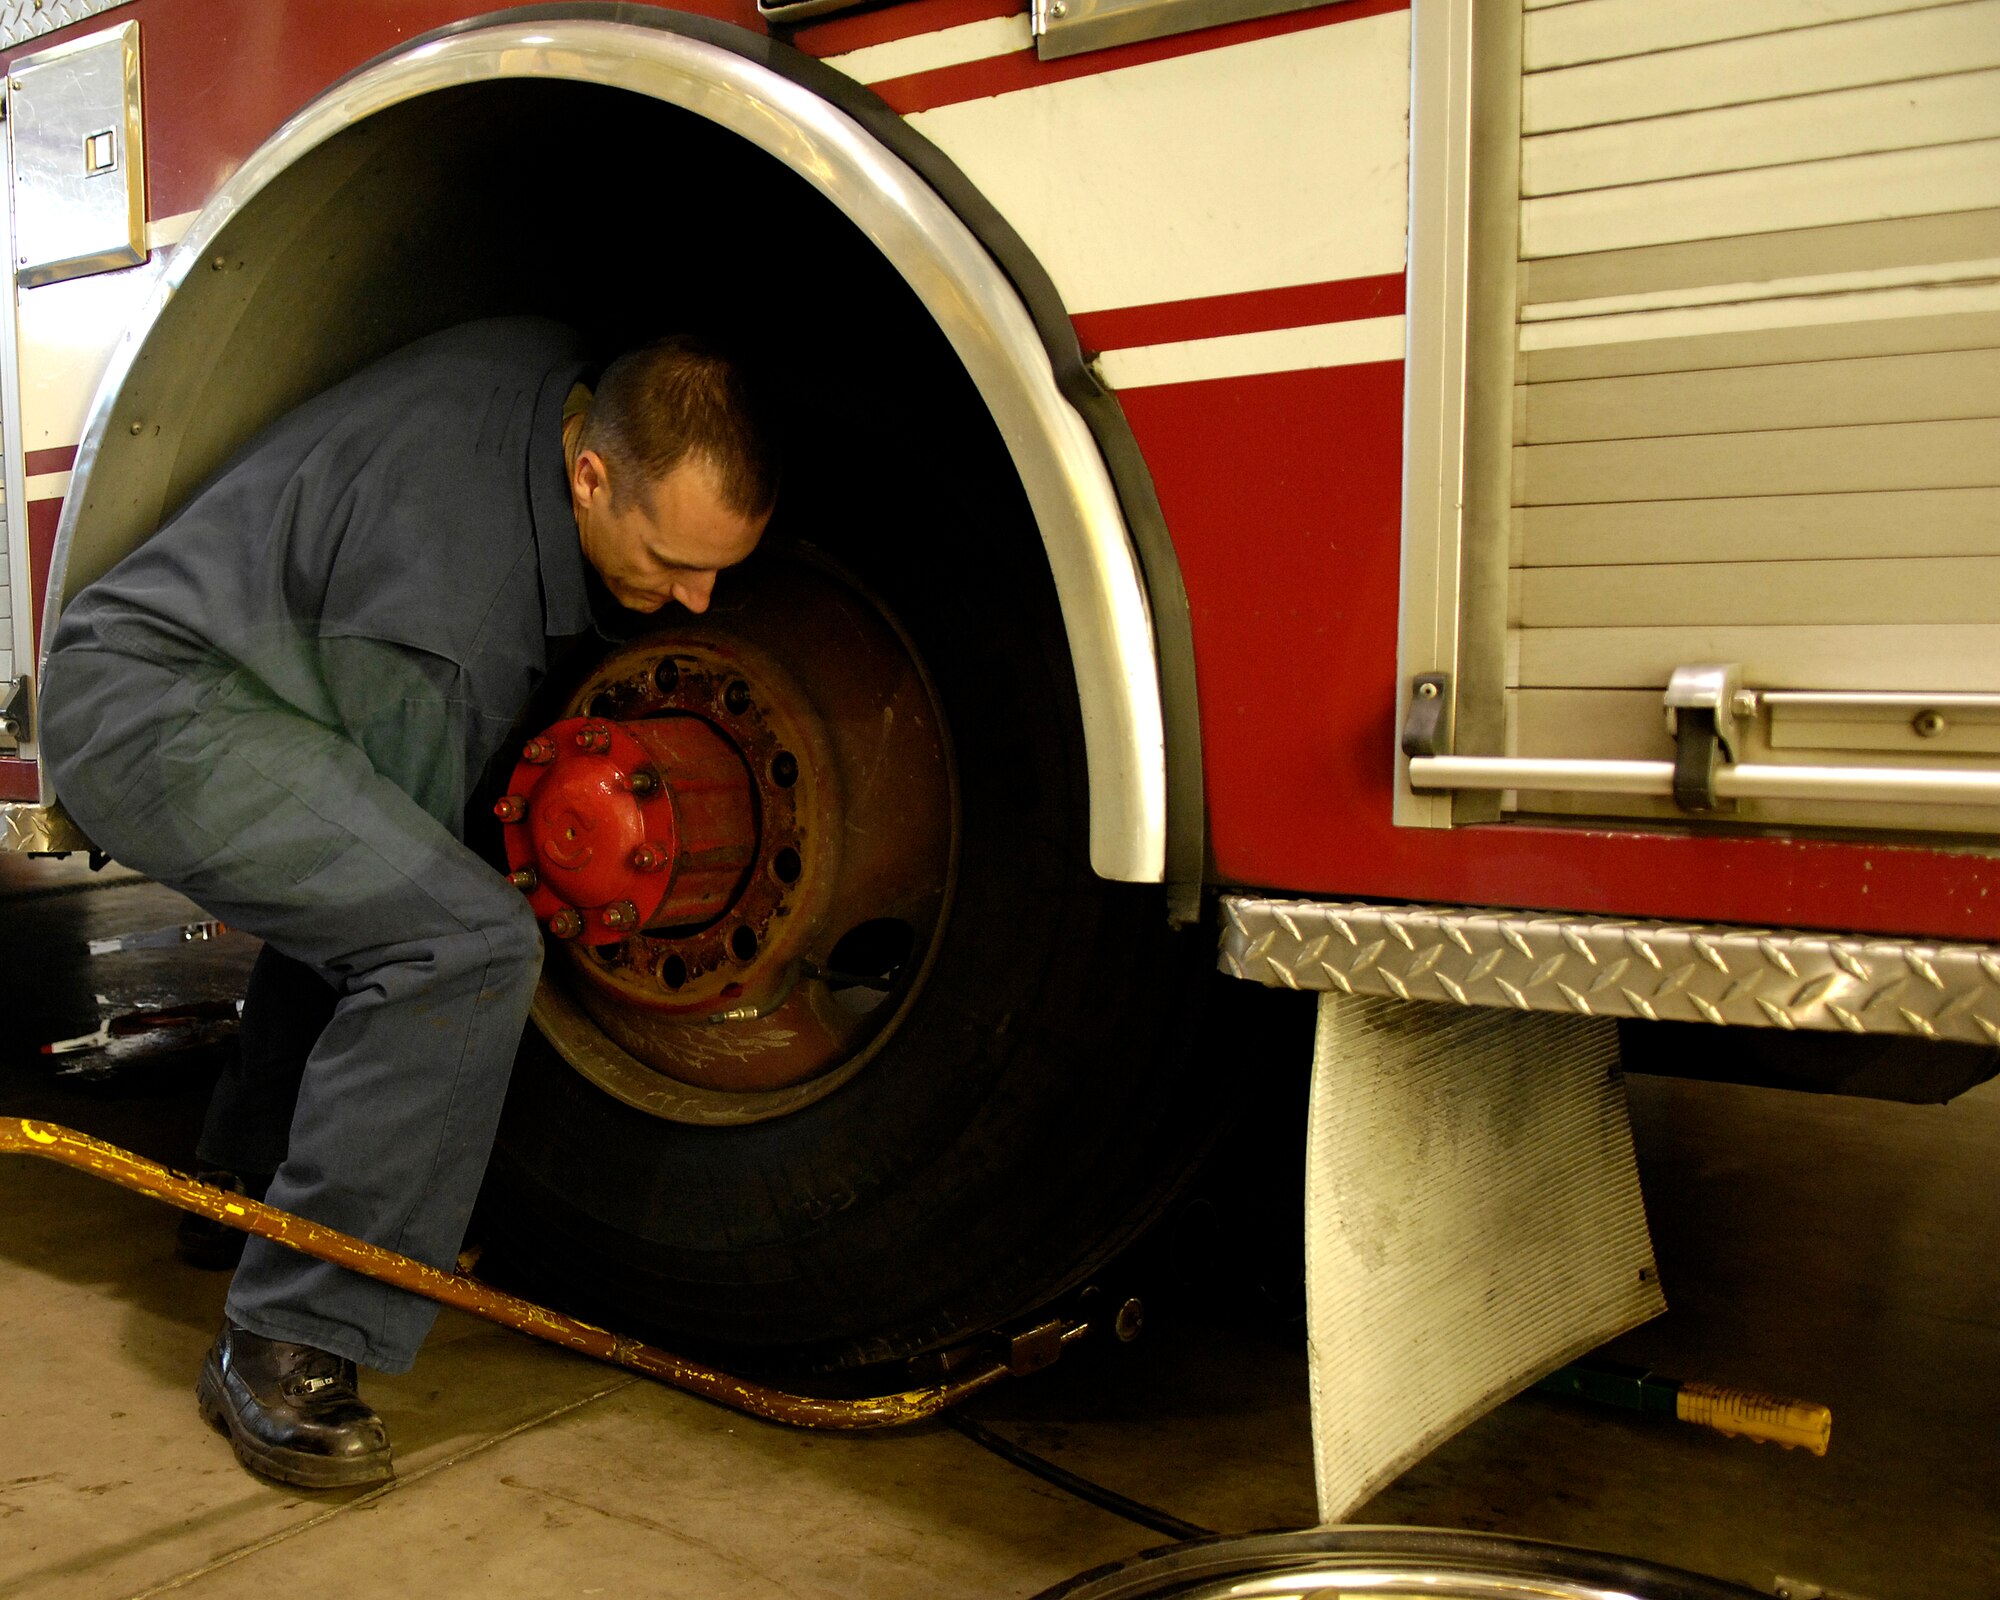 VANDENBERG AIR FORCE BASE, Calif. -- Staff Sgt. Jason Walters, 30th Logistics Readiness Squadron, changes a tire on a fire engine on Dec. 5.  Sergeant Walters recently returned from convoy duty in Iraq while stationed at Camp Arifjan, Kuwait. (U.S. Air Force photo/Airman 1st Class Jonathan Olds)
